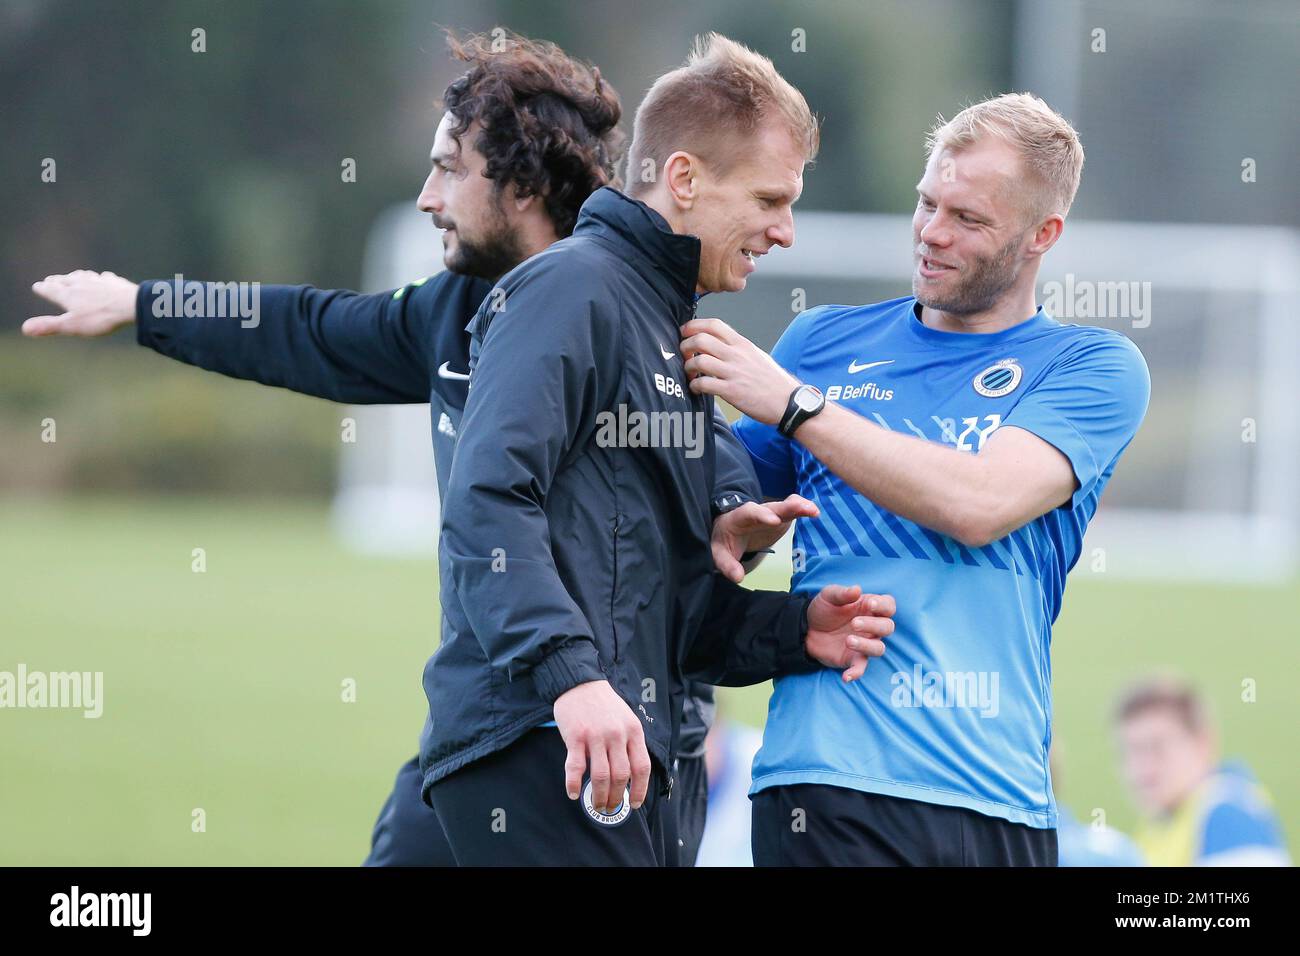 20140104 - SAN ROQUE, SPAIN: Club's goalkeeper trainer RIcardo Lopez, Club's goalkeeper Vladan Kujovic and Club's Eidur Gudjohnsen pictured during a training session on the first day of the winter camp of Belgian first division soccer team Club Brugge KV in San Roque, Spain, Saturday 04 January 2014. BELGA PHOTO BRUNO FAHY Stock Photo